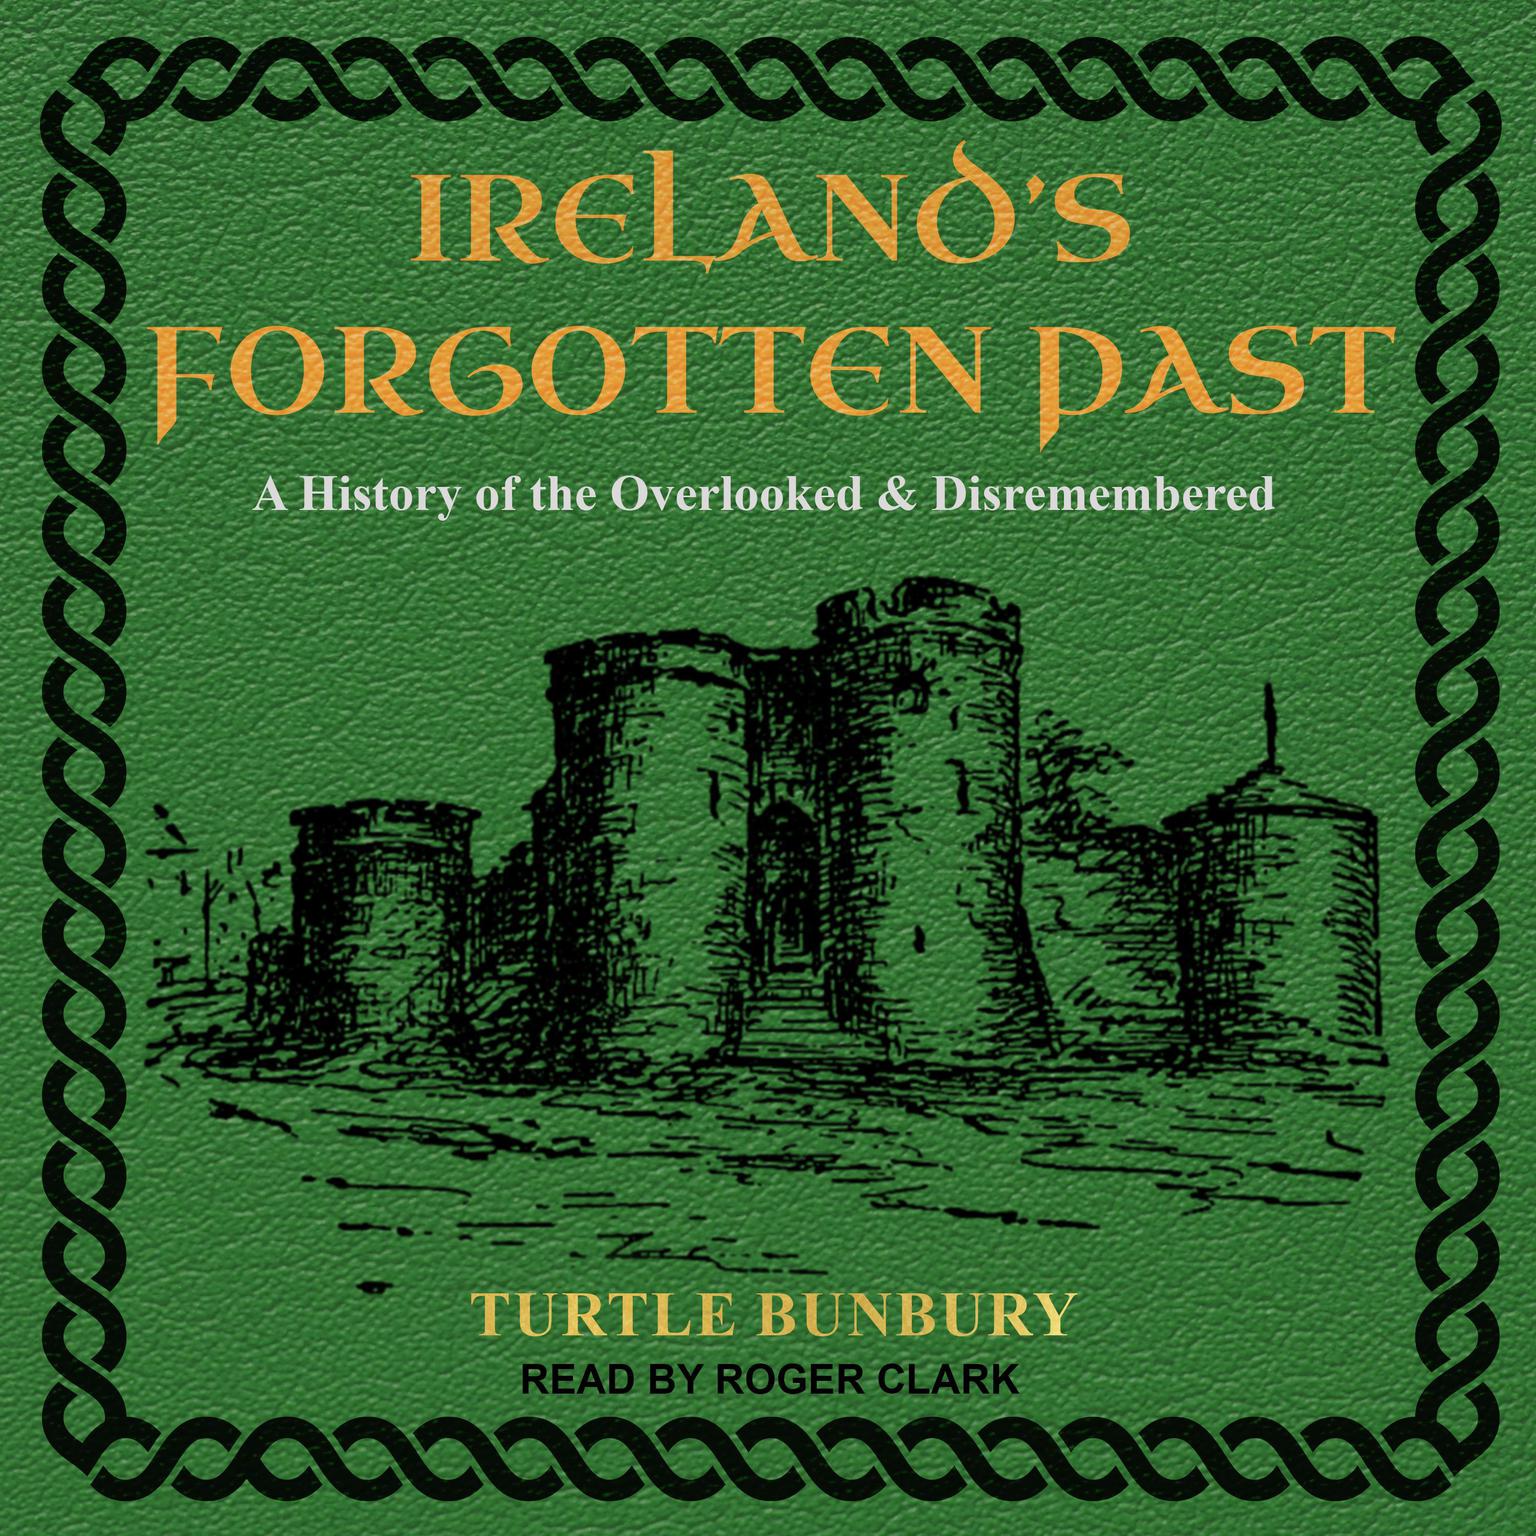 Ireland’s Forgotten Past: A History of the Overlooked and Disremembered Audiobook, by Turtle Bunbury